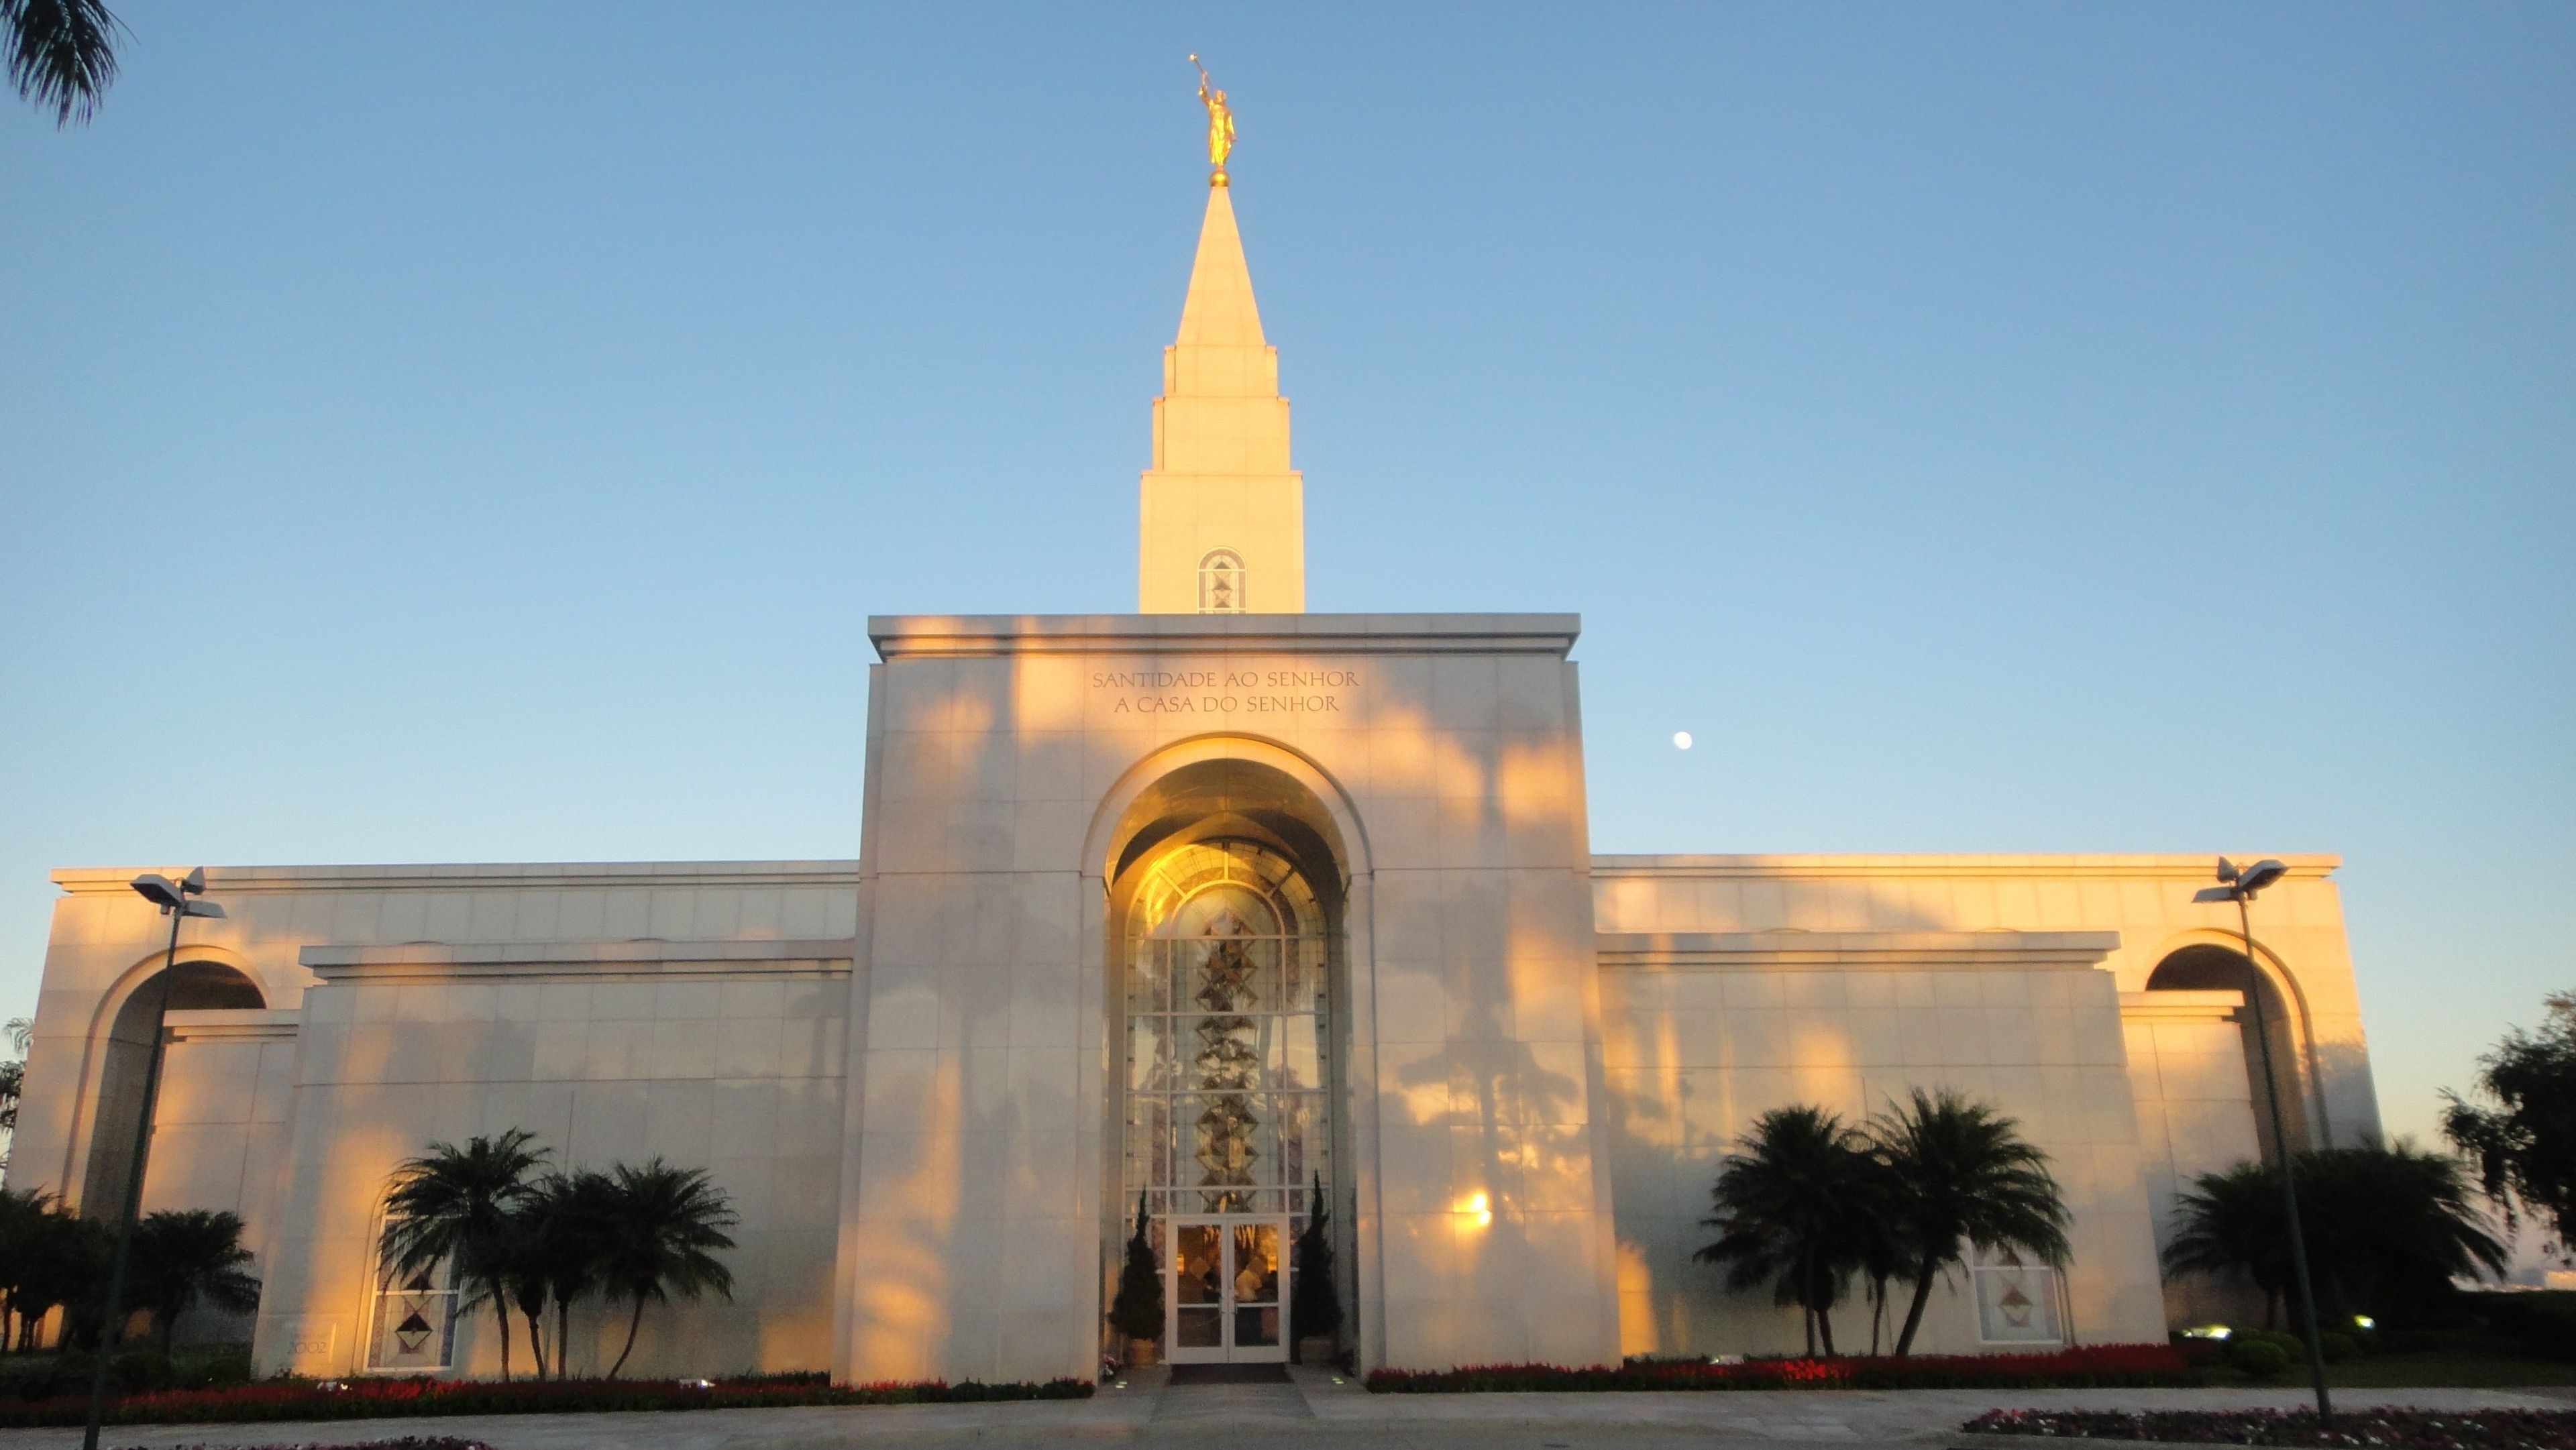 The large front doors of the Campinas Brazil Temple welcome members as they enter.